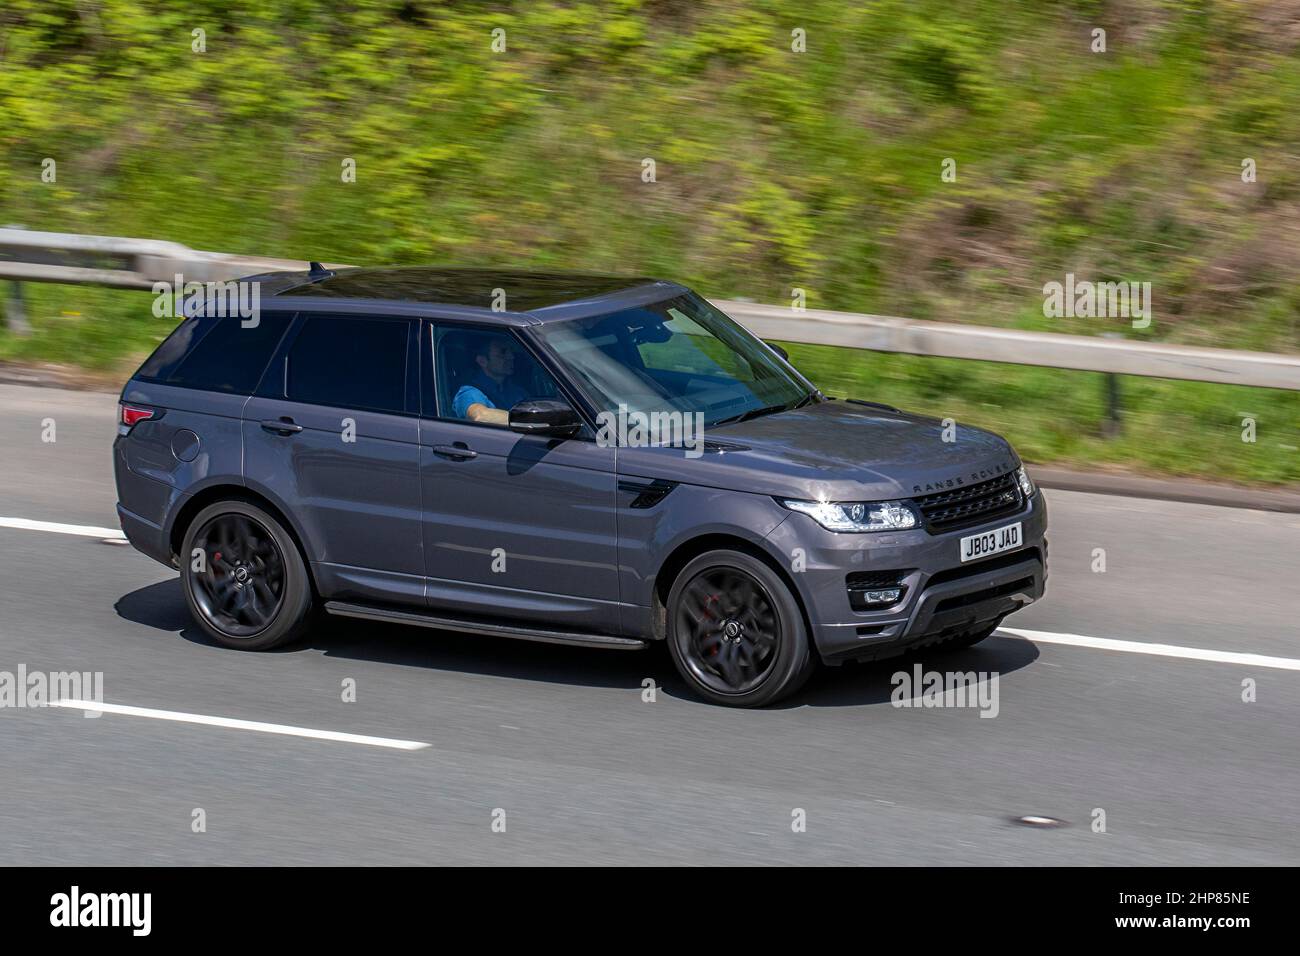 2017 grey Land Rover Range Rover Sport SDV6 HSE 2993cc 8 speed automatic; Vehicular traffic moving vehicles, driving vehicle on UK roads, motors, motoring on the M6 motorway highway Stock Photo